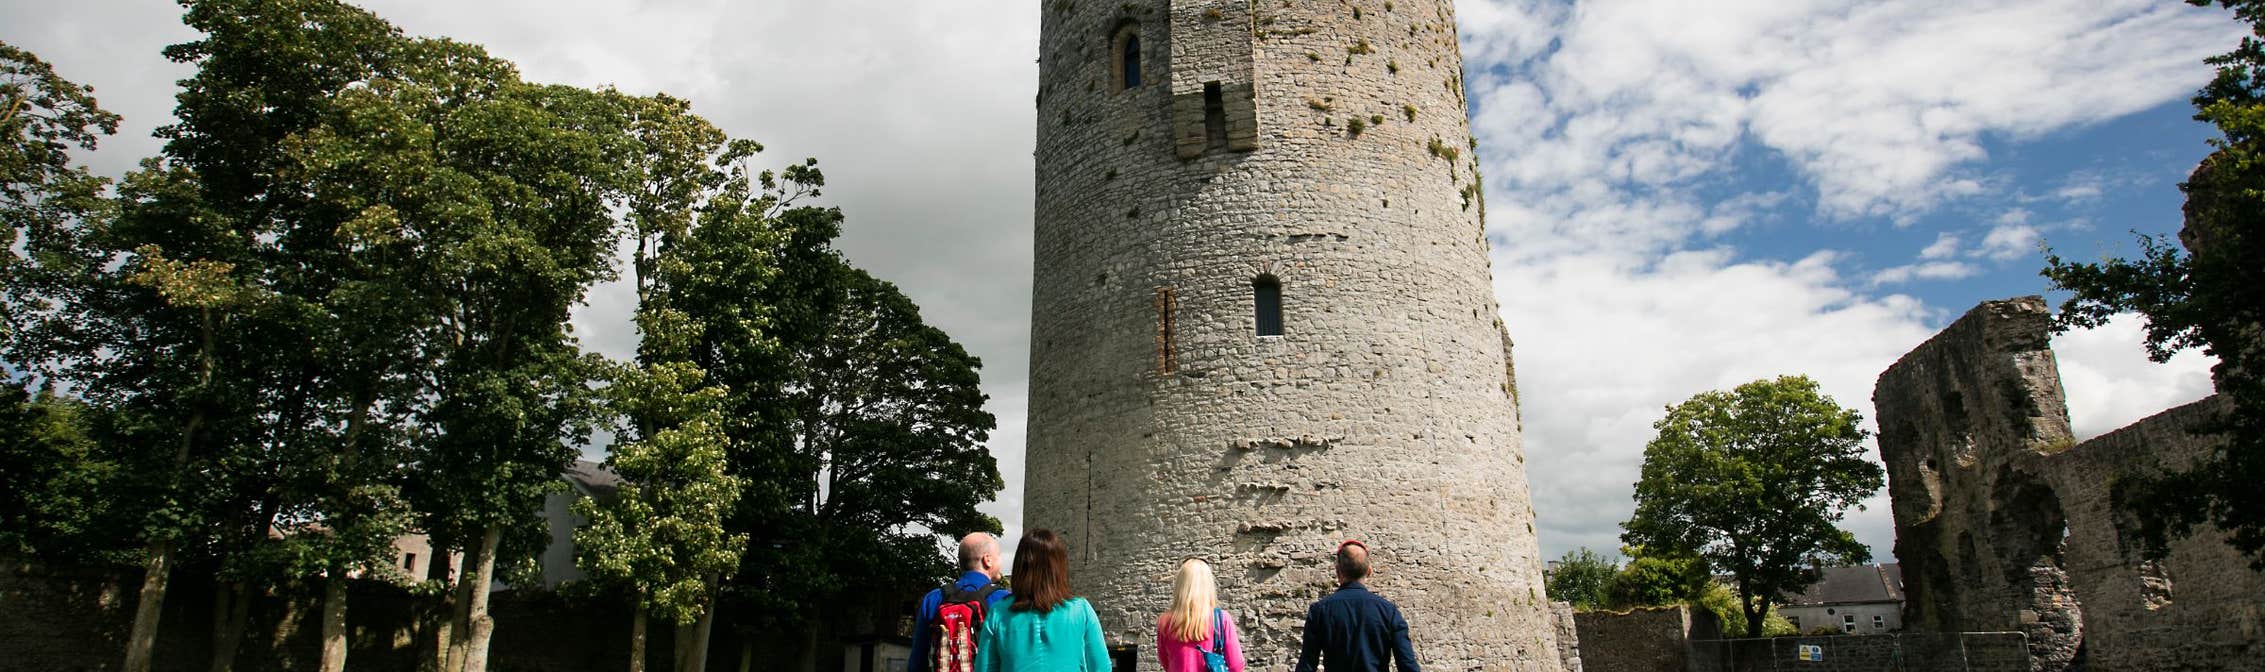 People walking up to Nenagh Castle in County Waterford